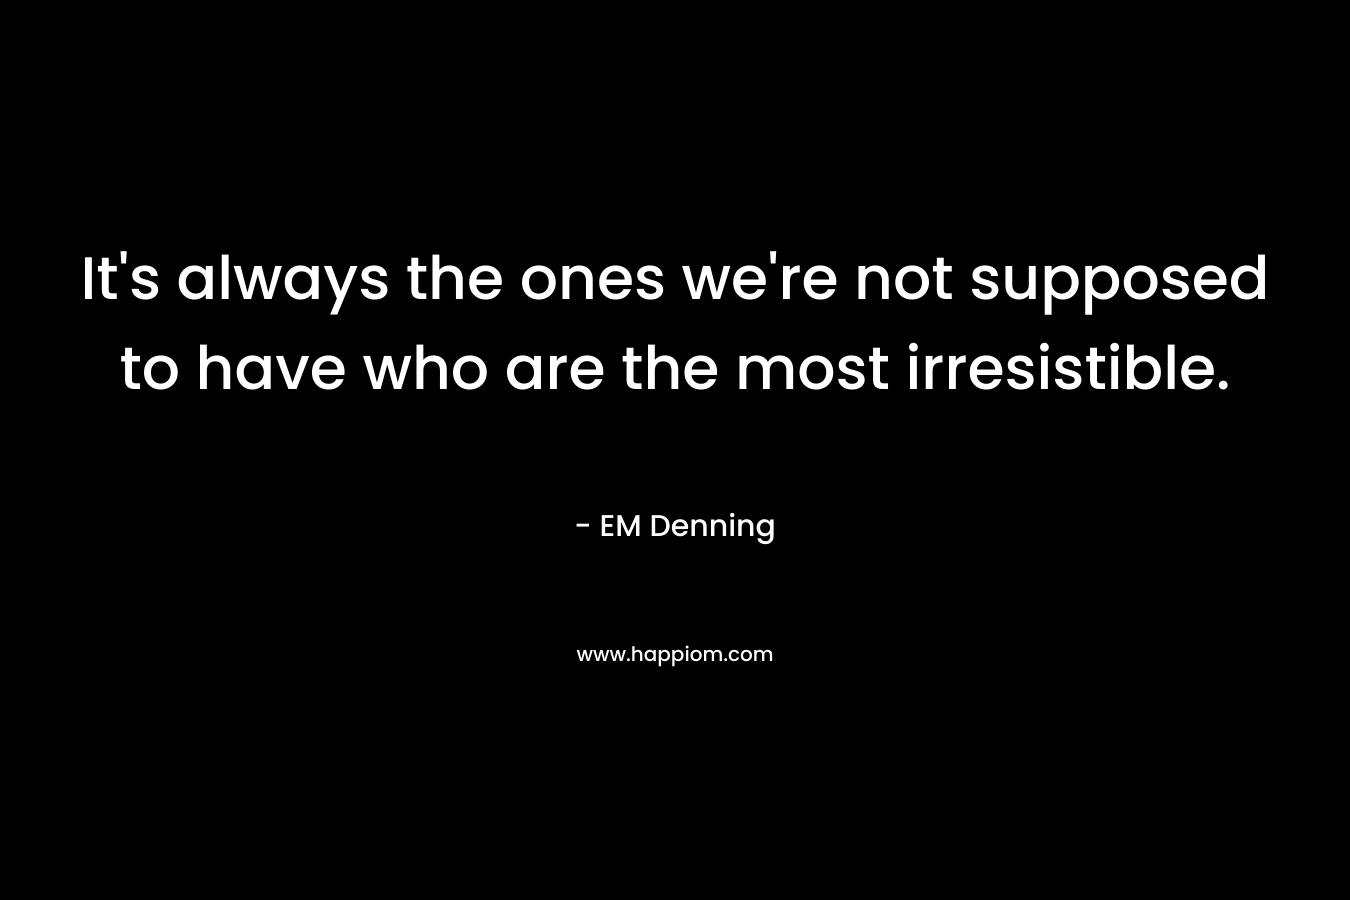 It’s always the ones we’re not supposed to have who are the most irresistible. – EM Denning